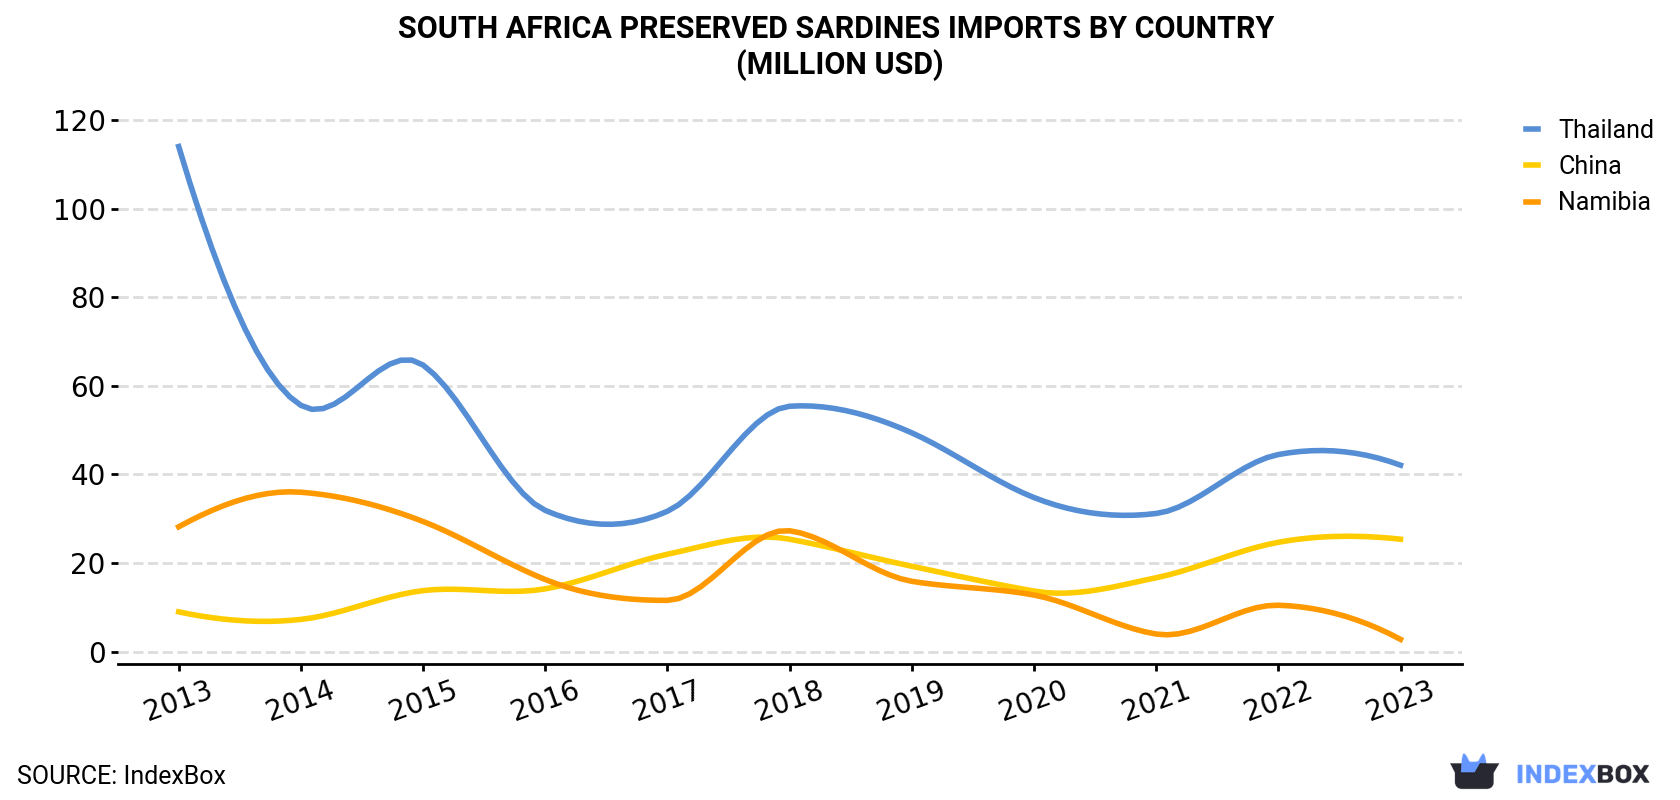 South Africa Preserved Sardines Imports By Country (Million USD)